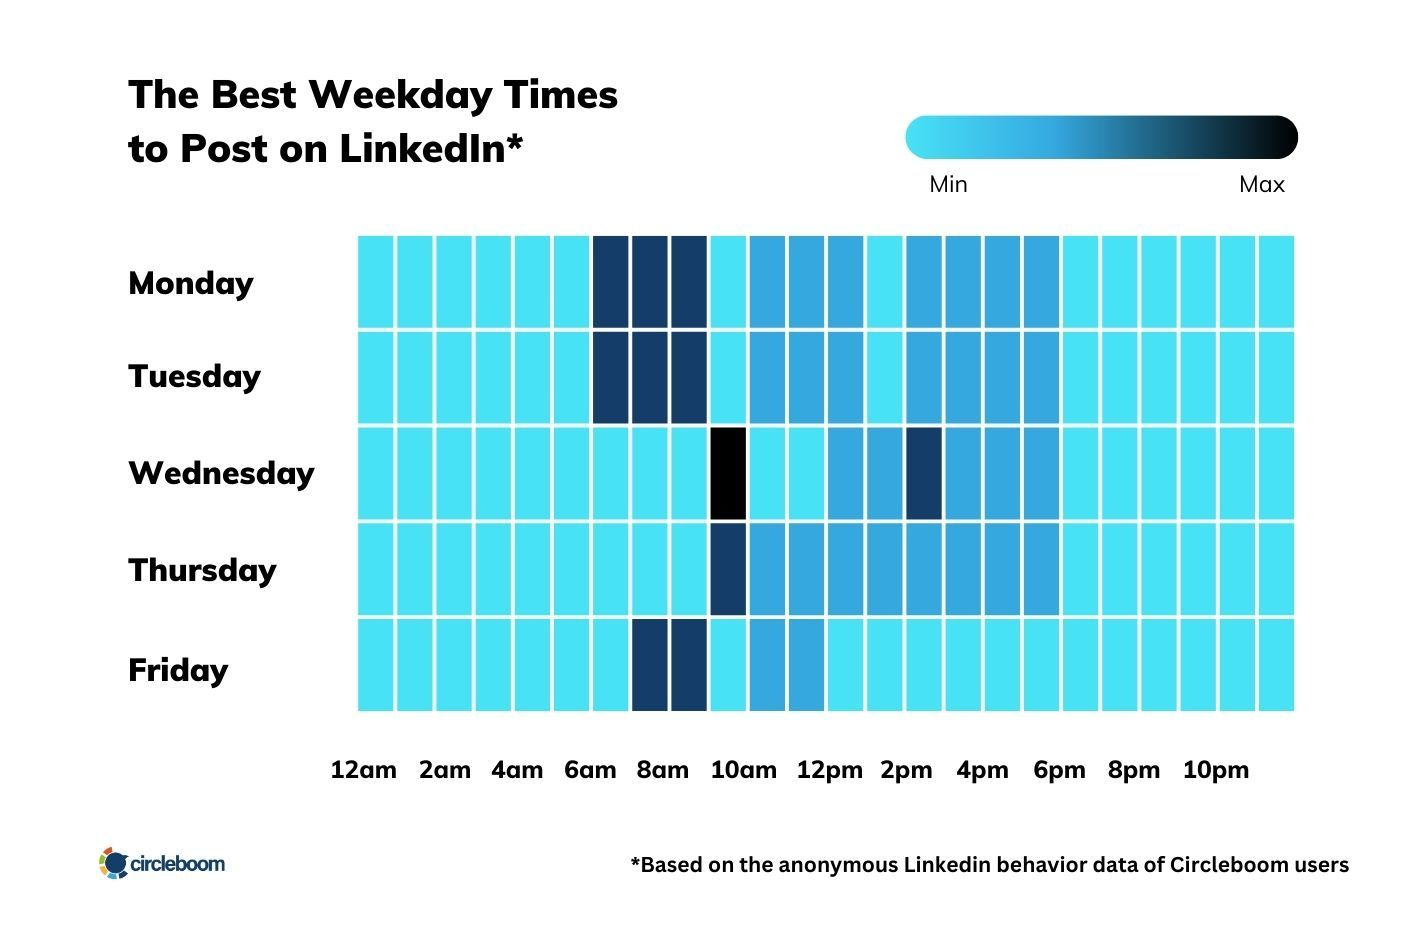 The best times to post on LinkedIn